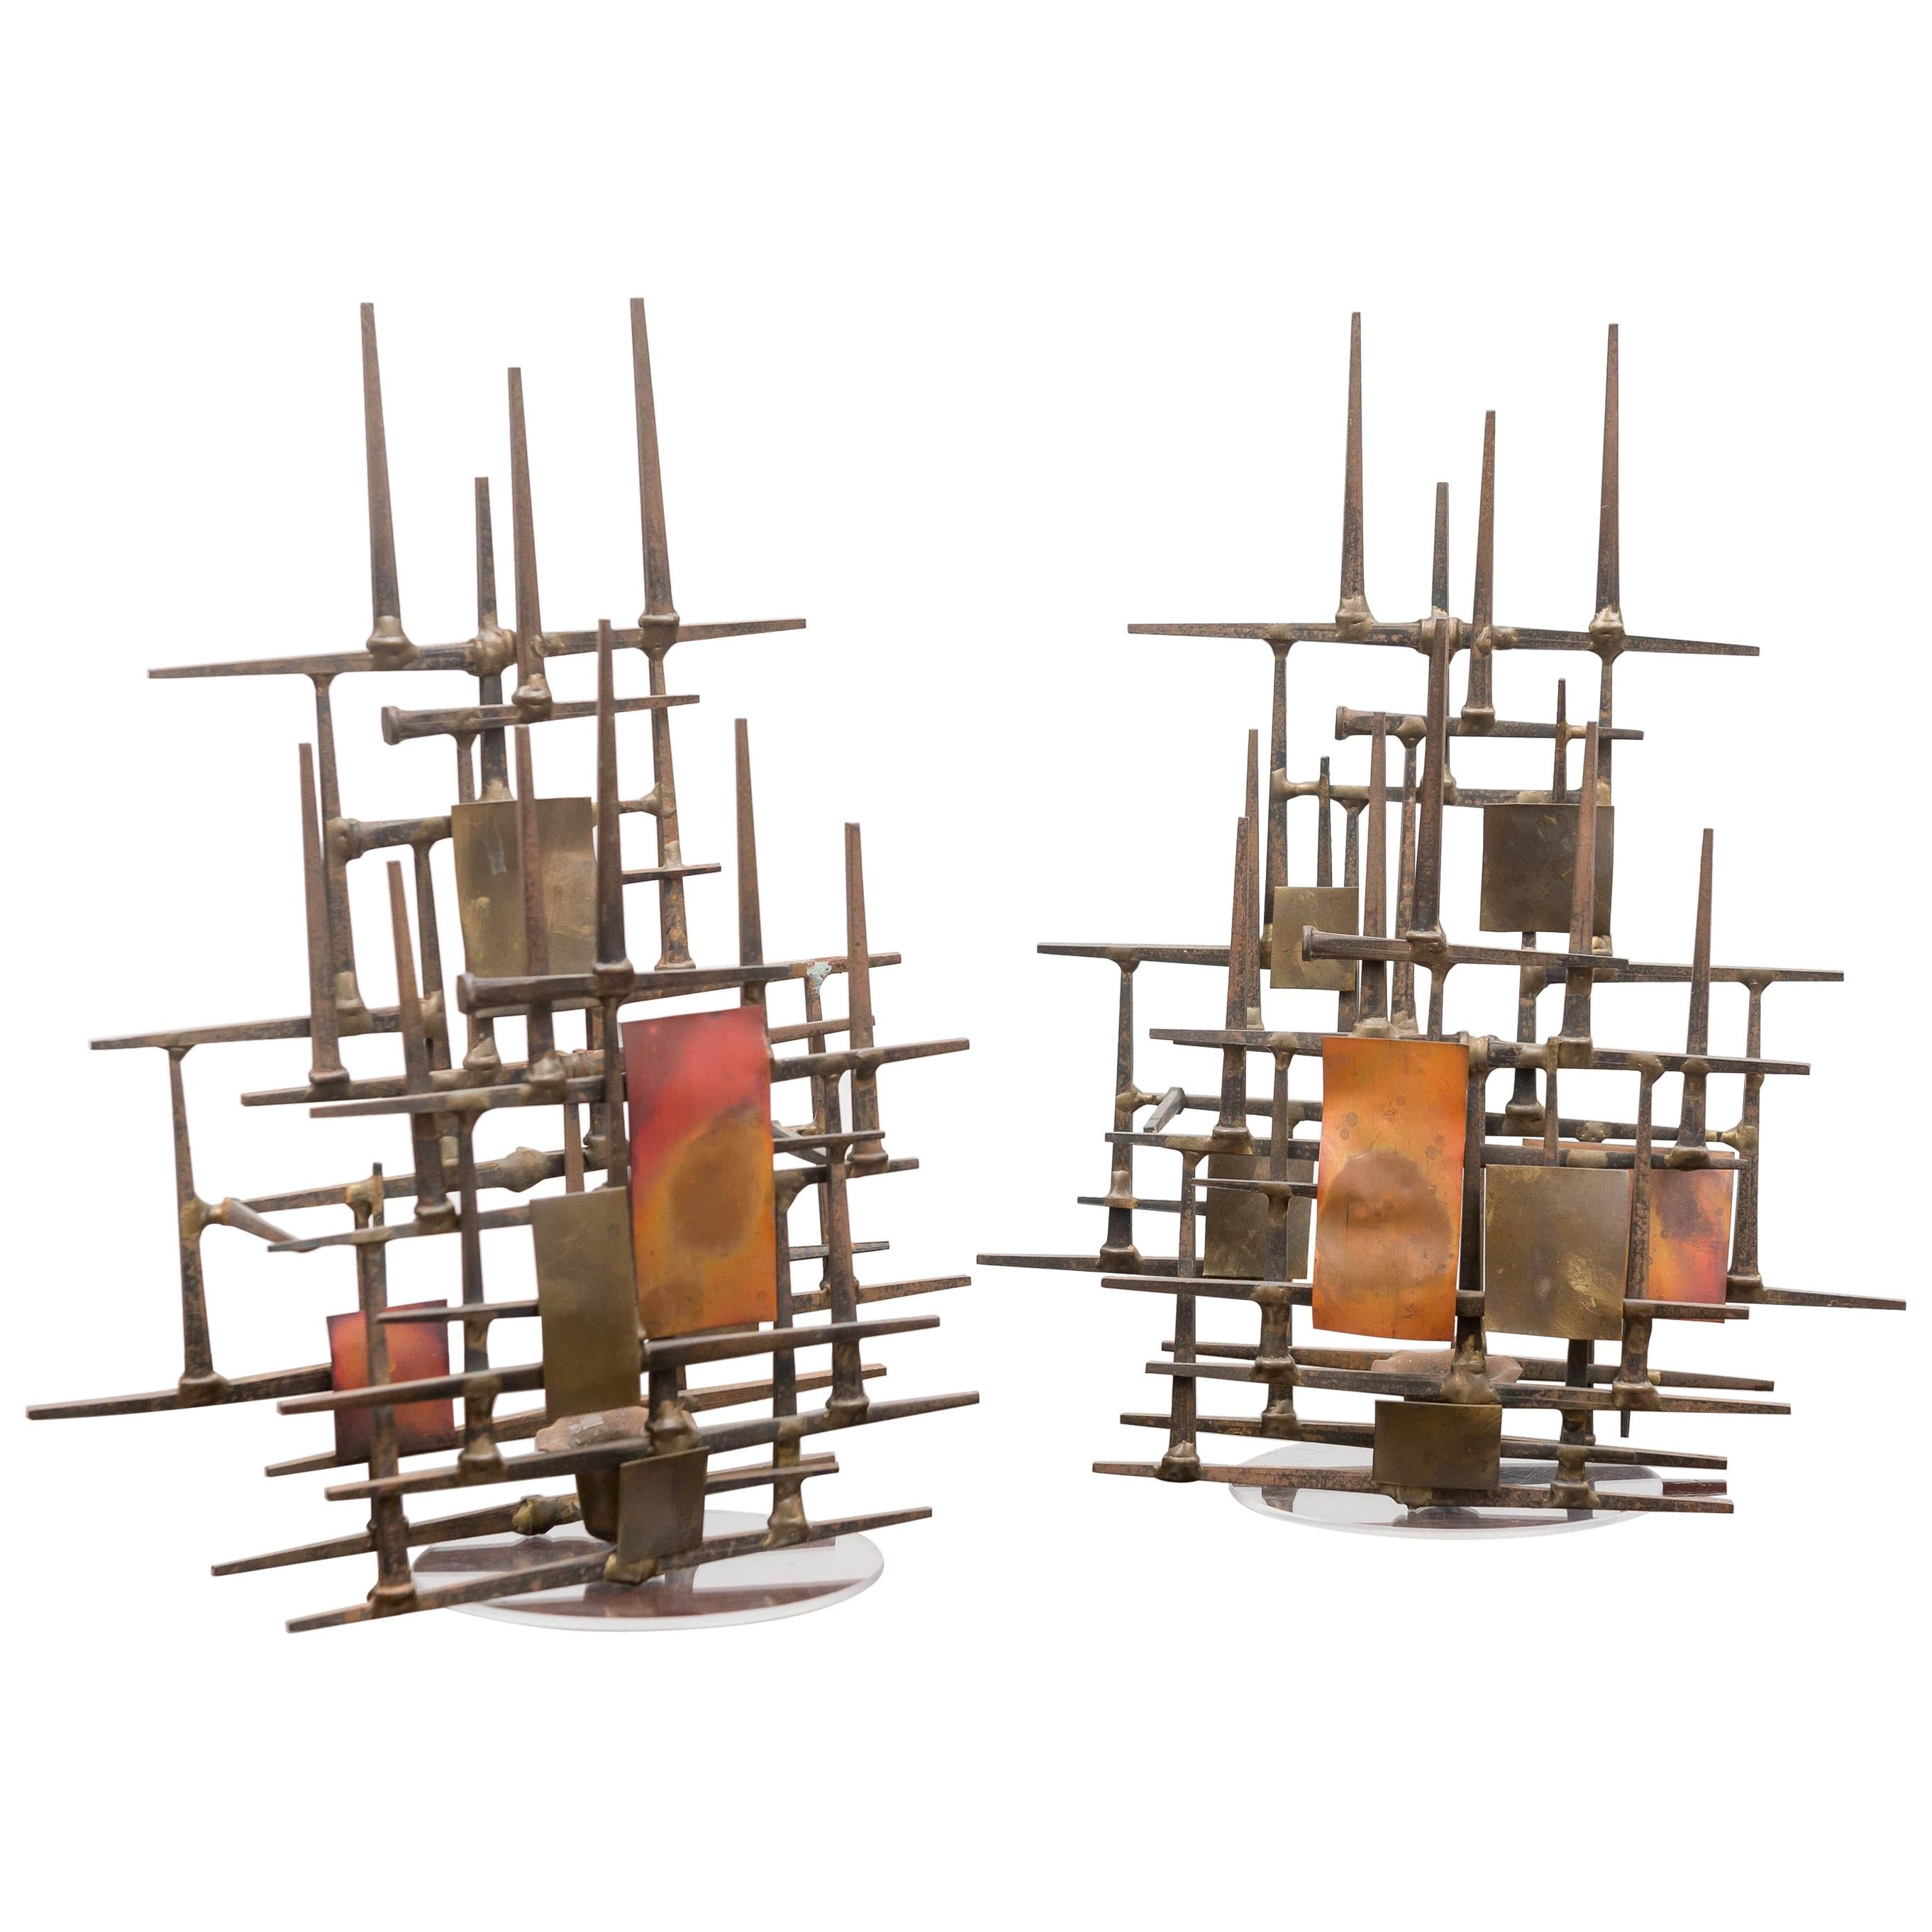 Pair of Mid-20th Century Brutalist Wall Sconces, circa 1960